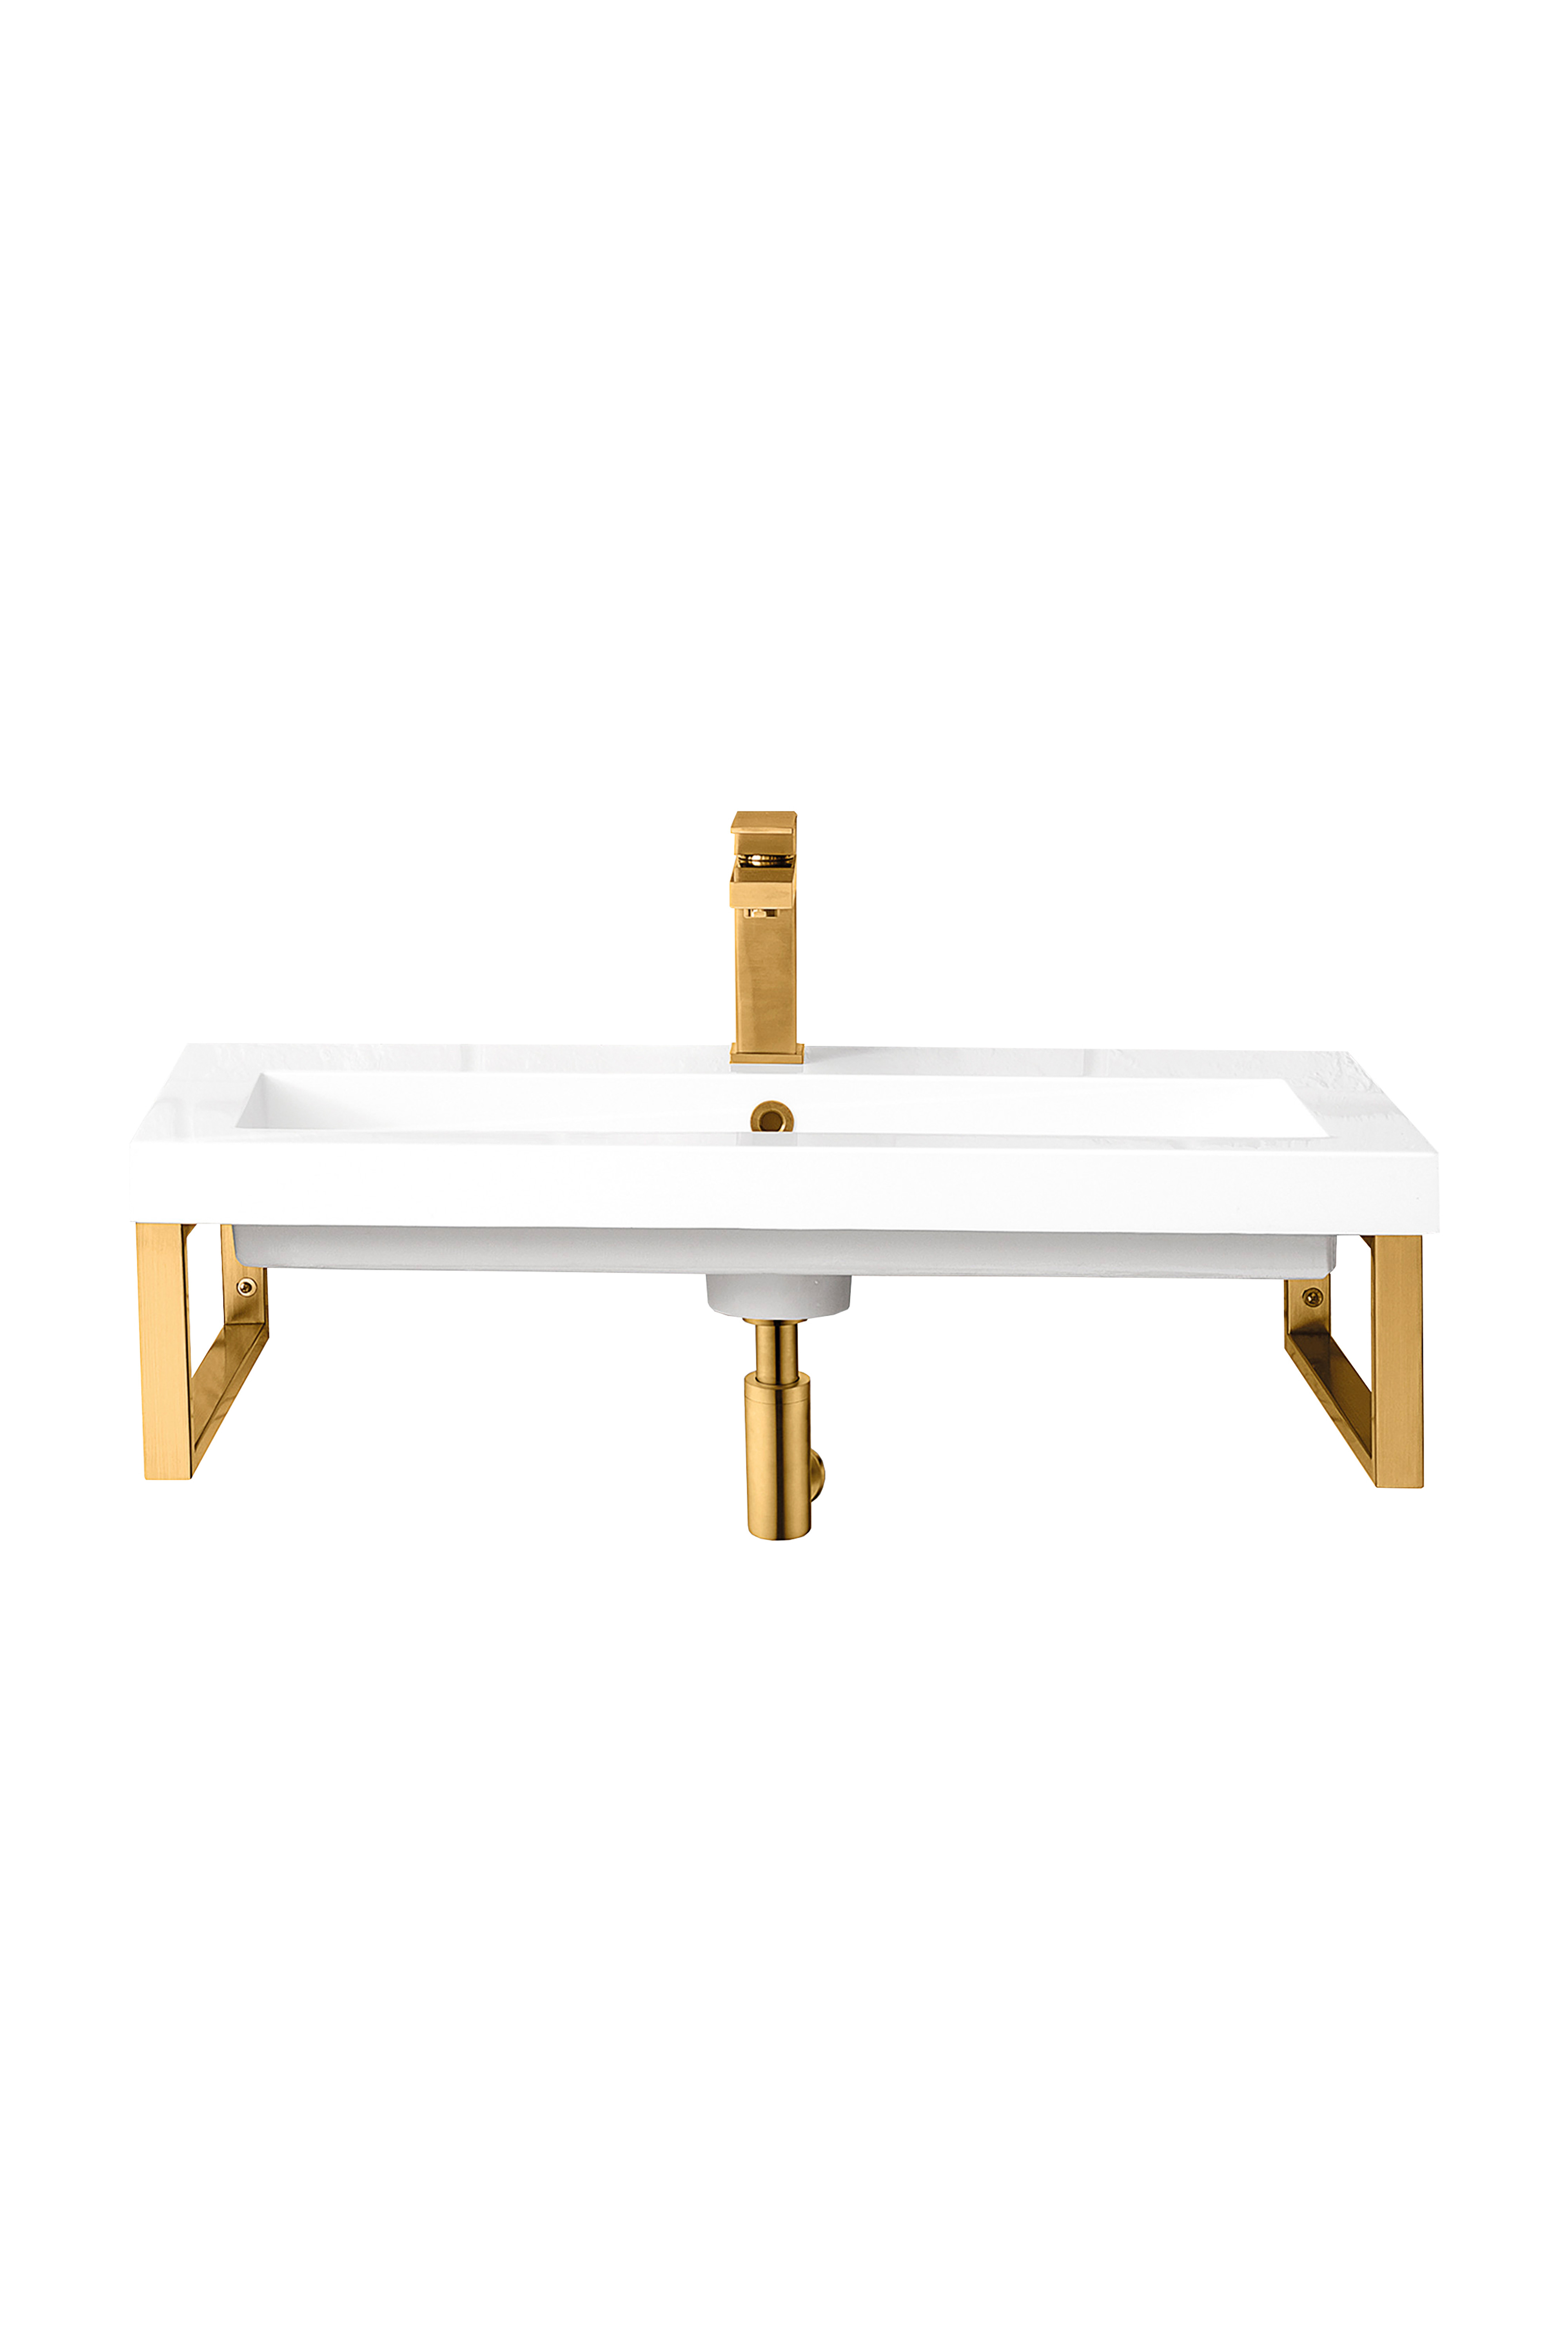 James Martin 055BK16RGD31.5WG2 Two Boston 15 1/4" Wall Brackets, Radiant Gold w/31.5" White Glossy Composite Countertop